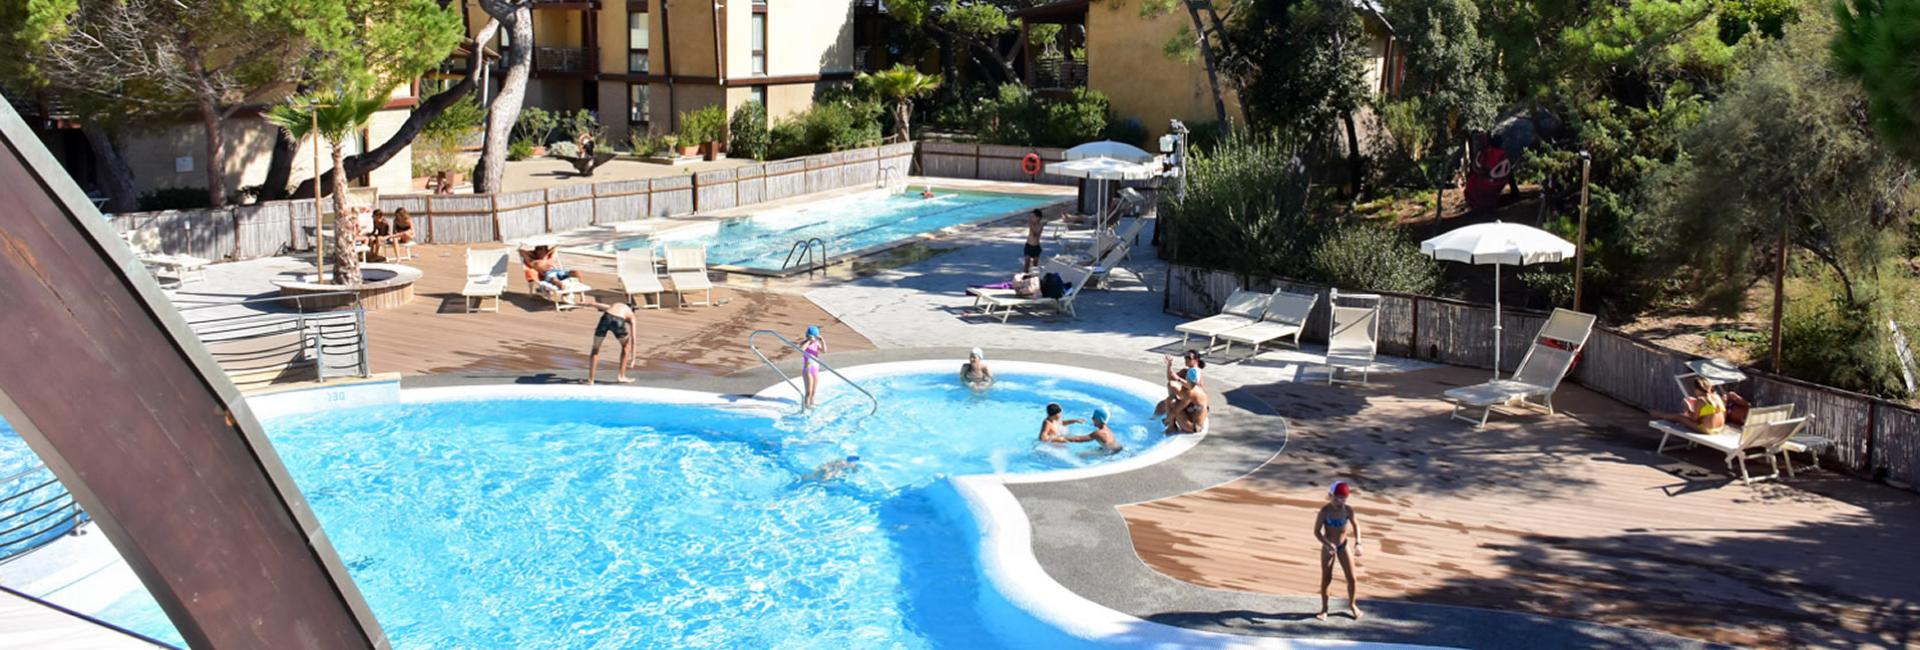 canadoclub en resort-with-swimming-pool-tuscany 003